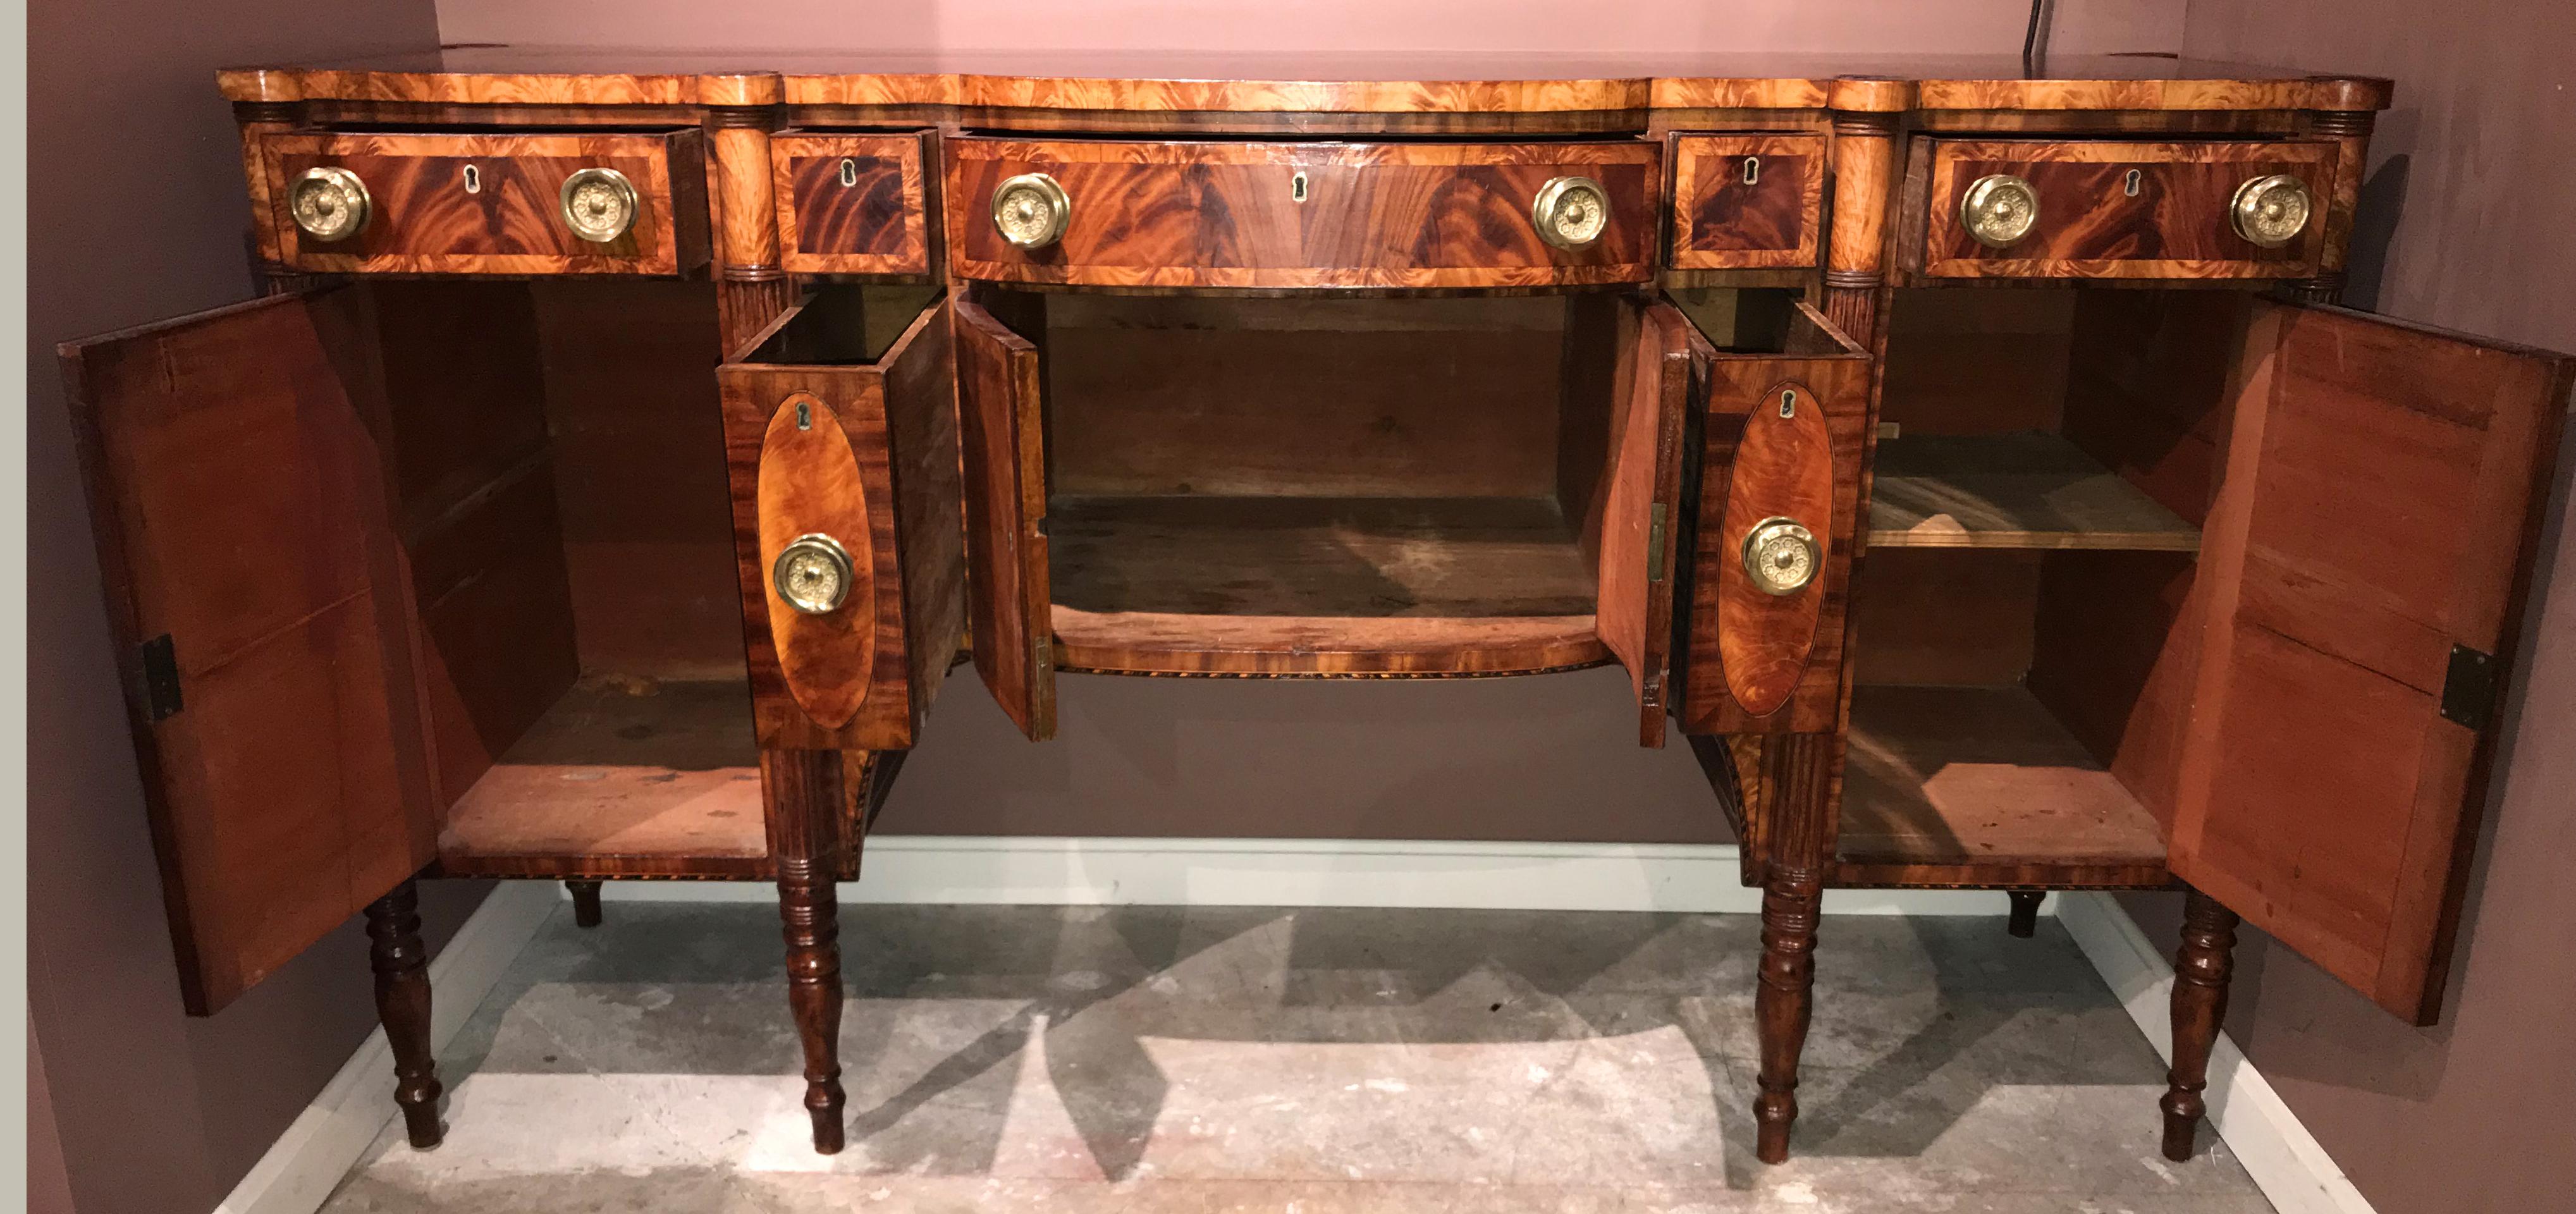 Exceptional Portsmouth, NH Sideboard Attributed to Judkins & Senter, circa 1810 1